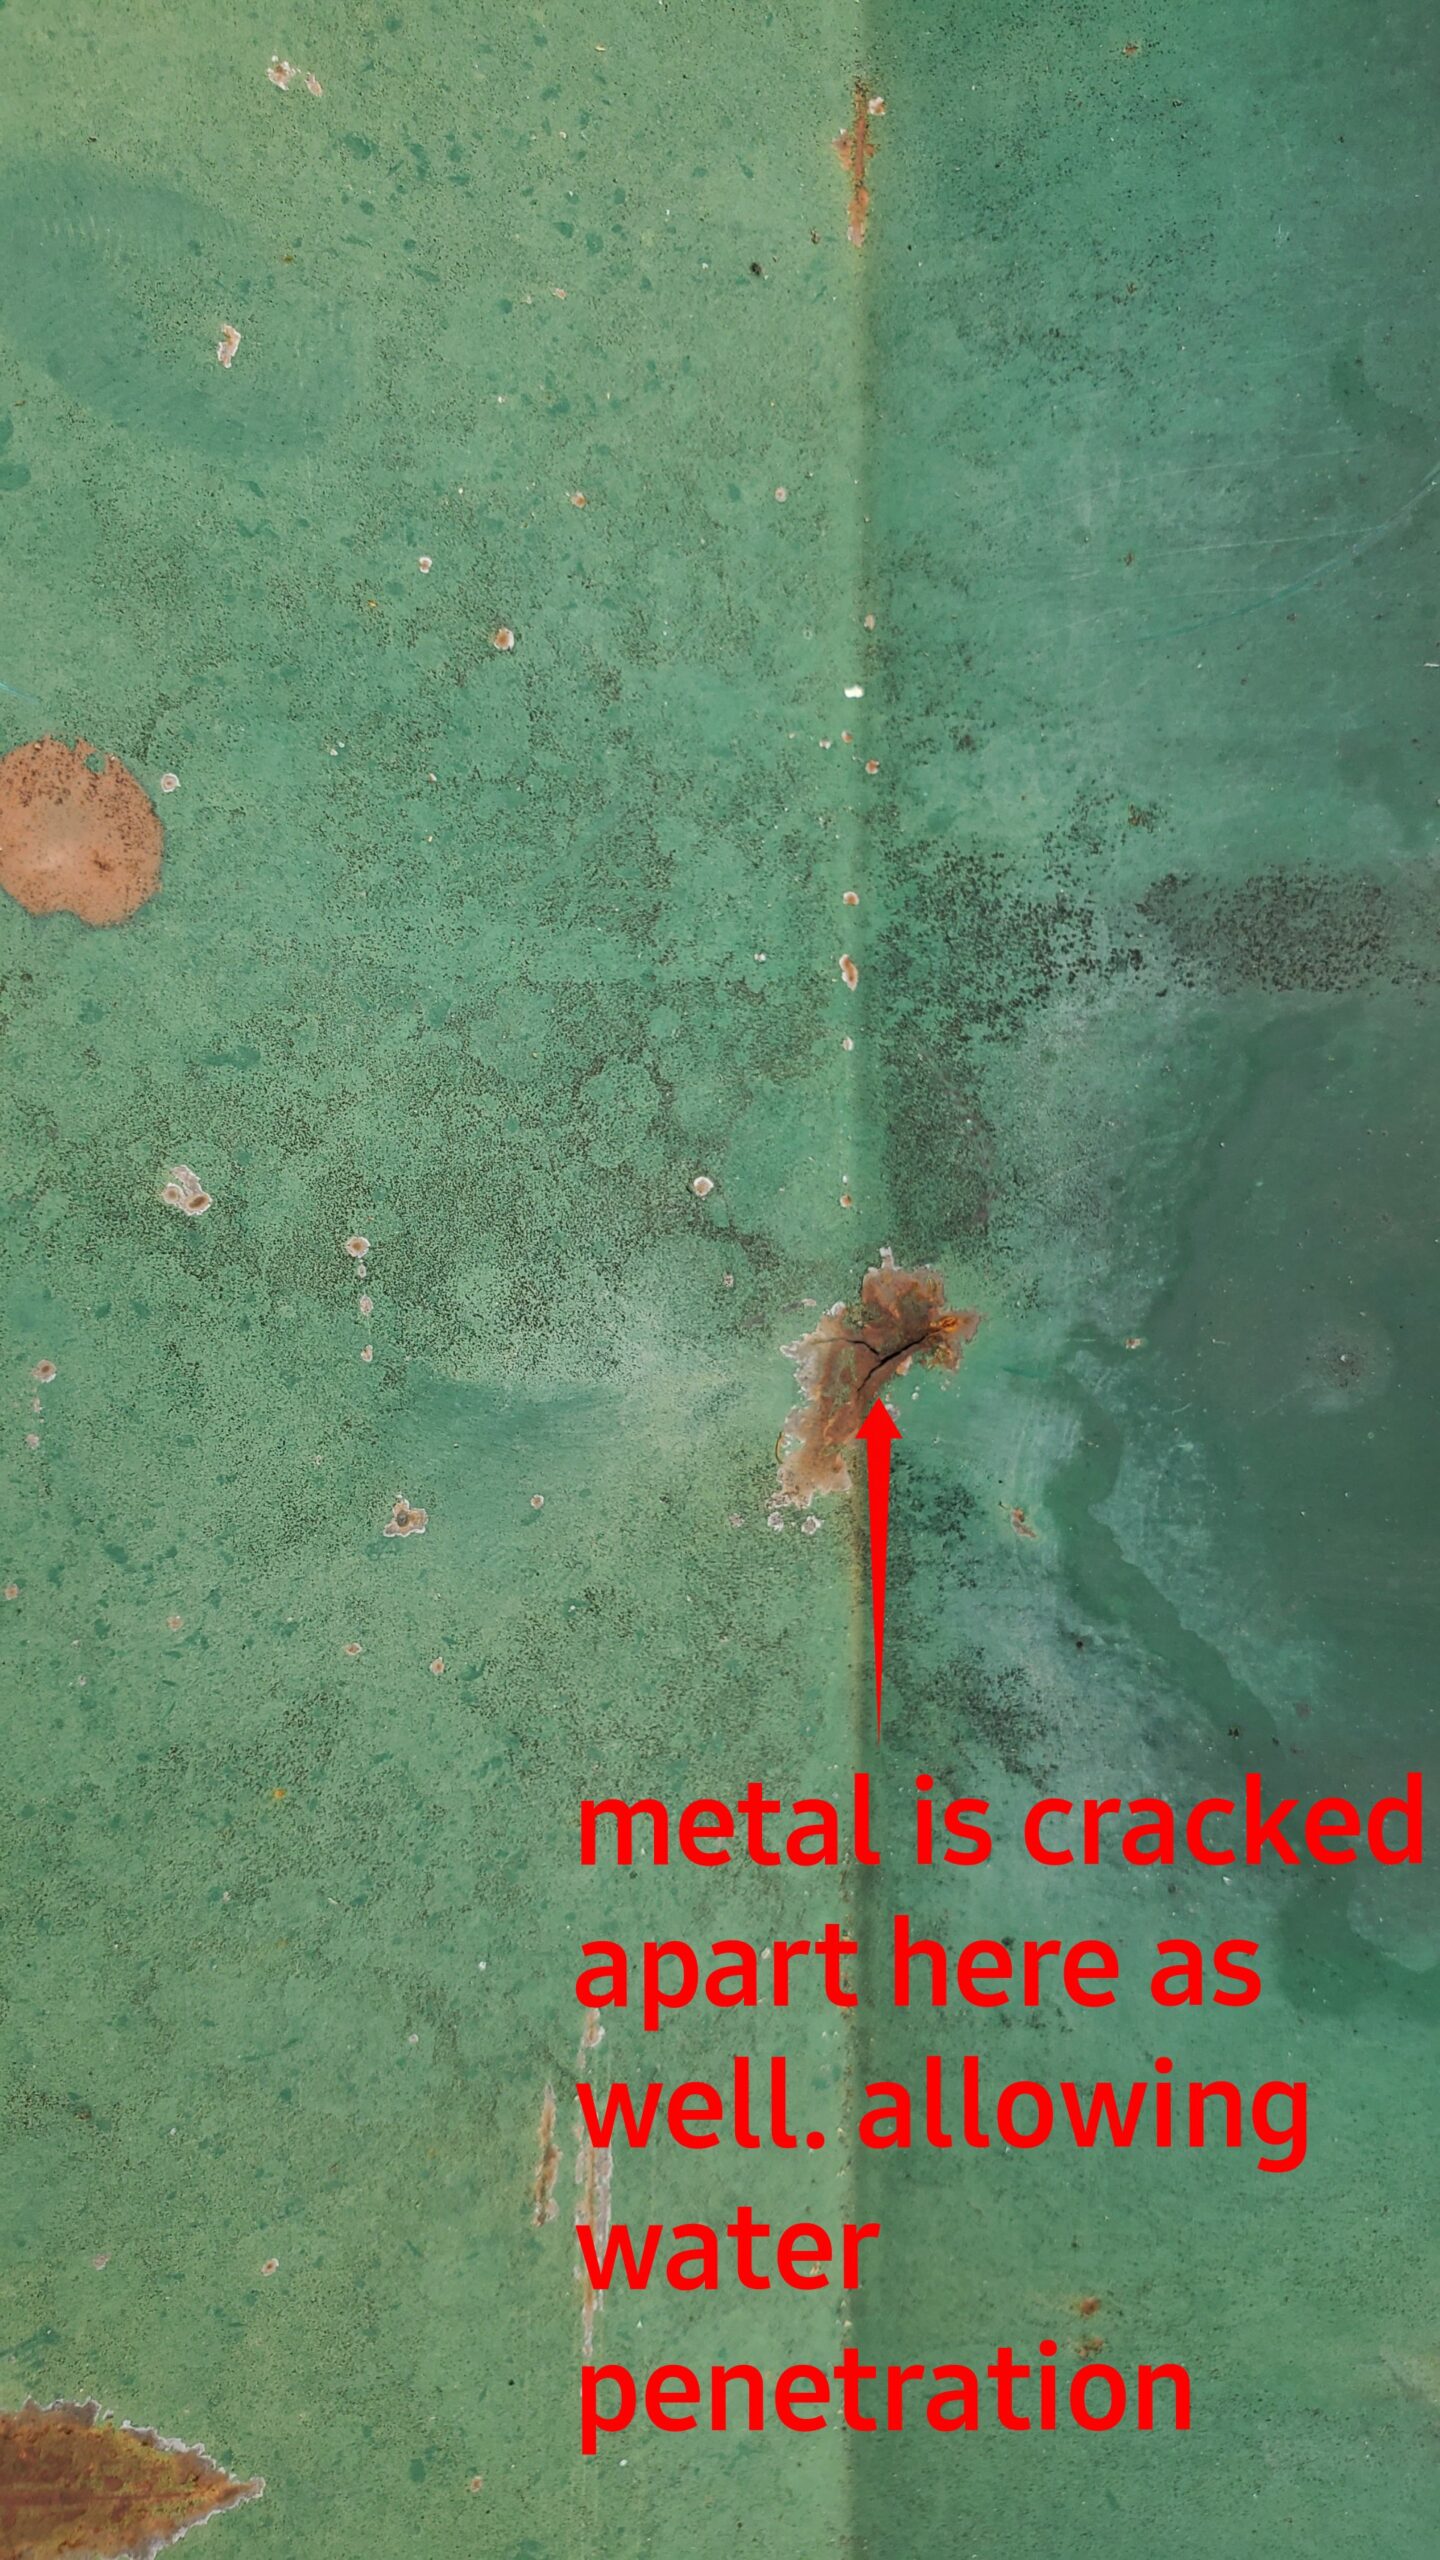 This is a picture of a green metal roof with a rusted spot that is cracked allowing water in